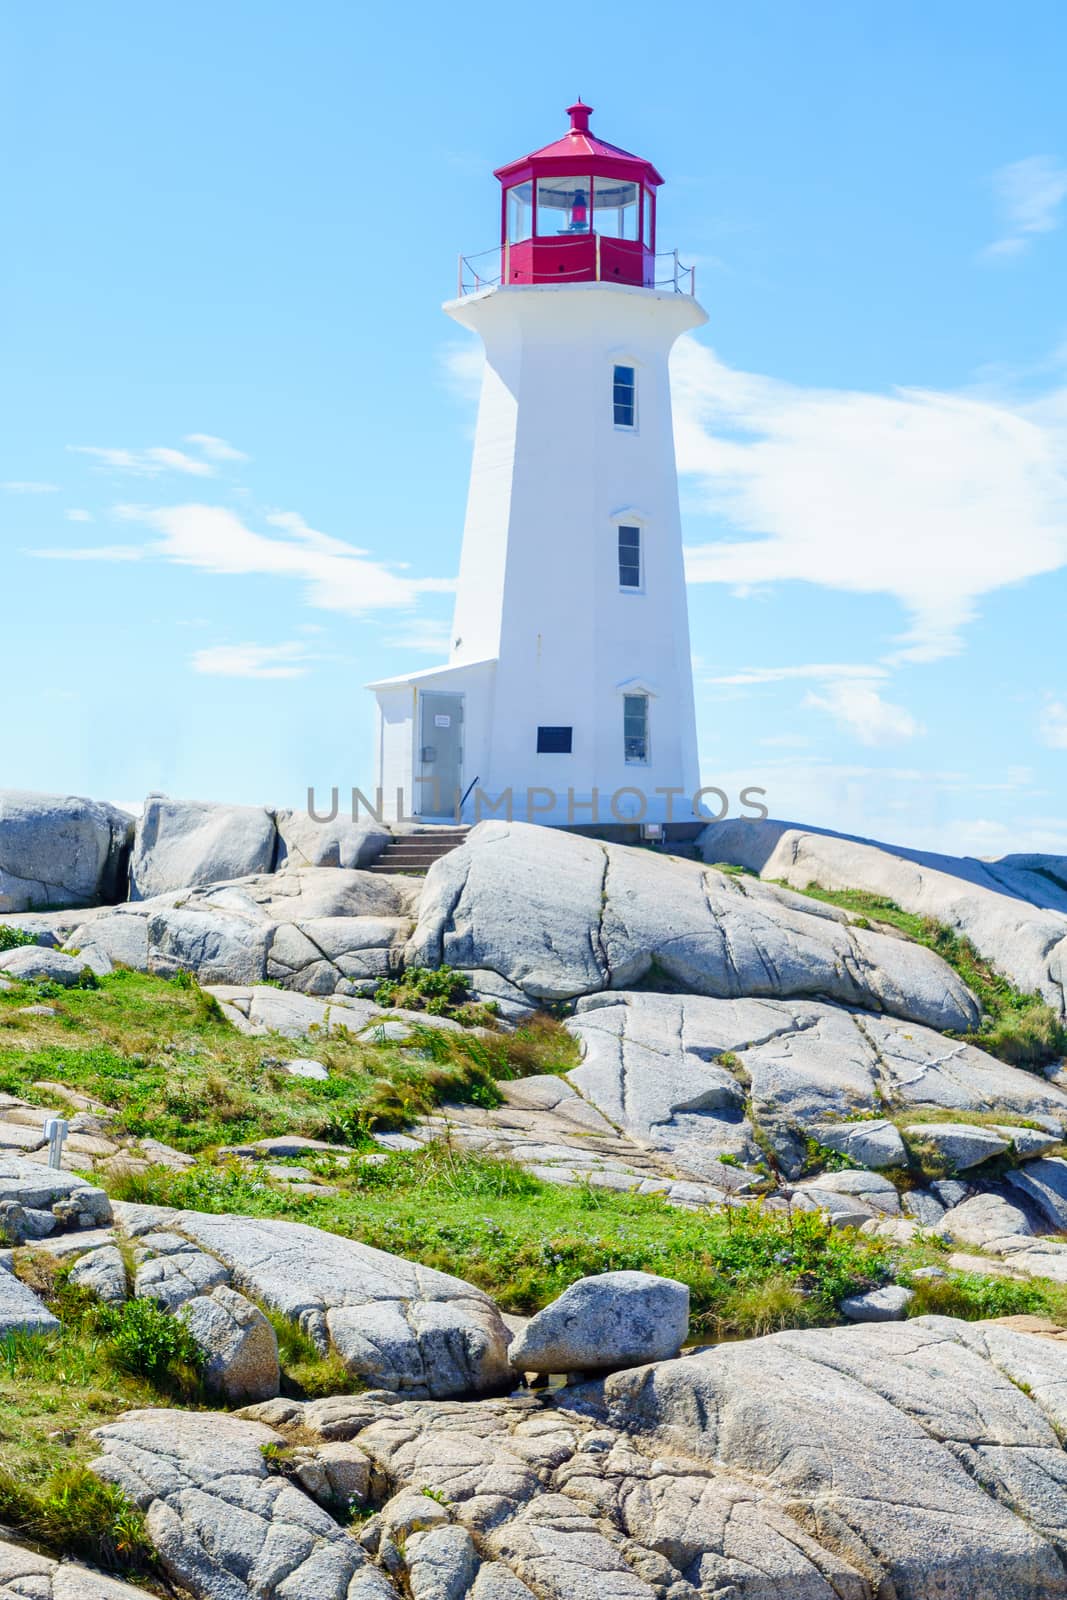 View of the lighthouse of the fishing village Peggys Cove, in Nova Scotia, Canada